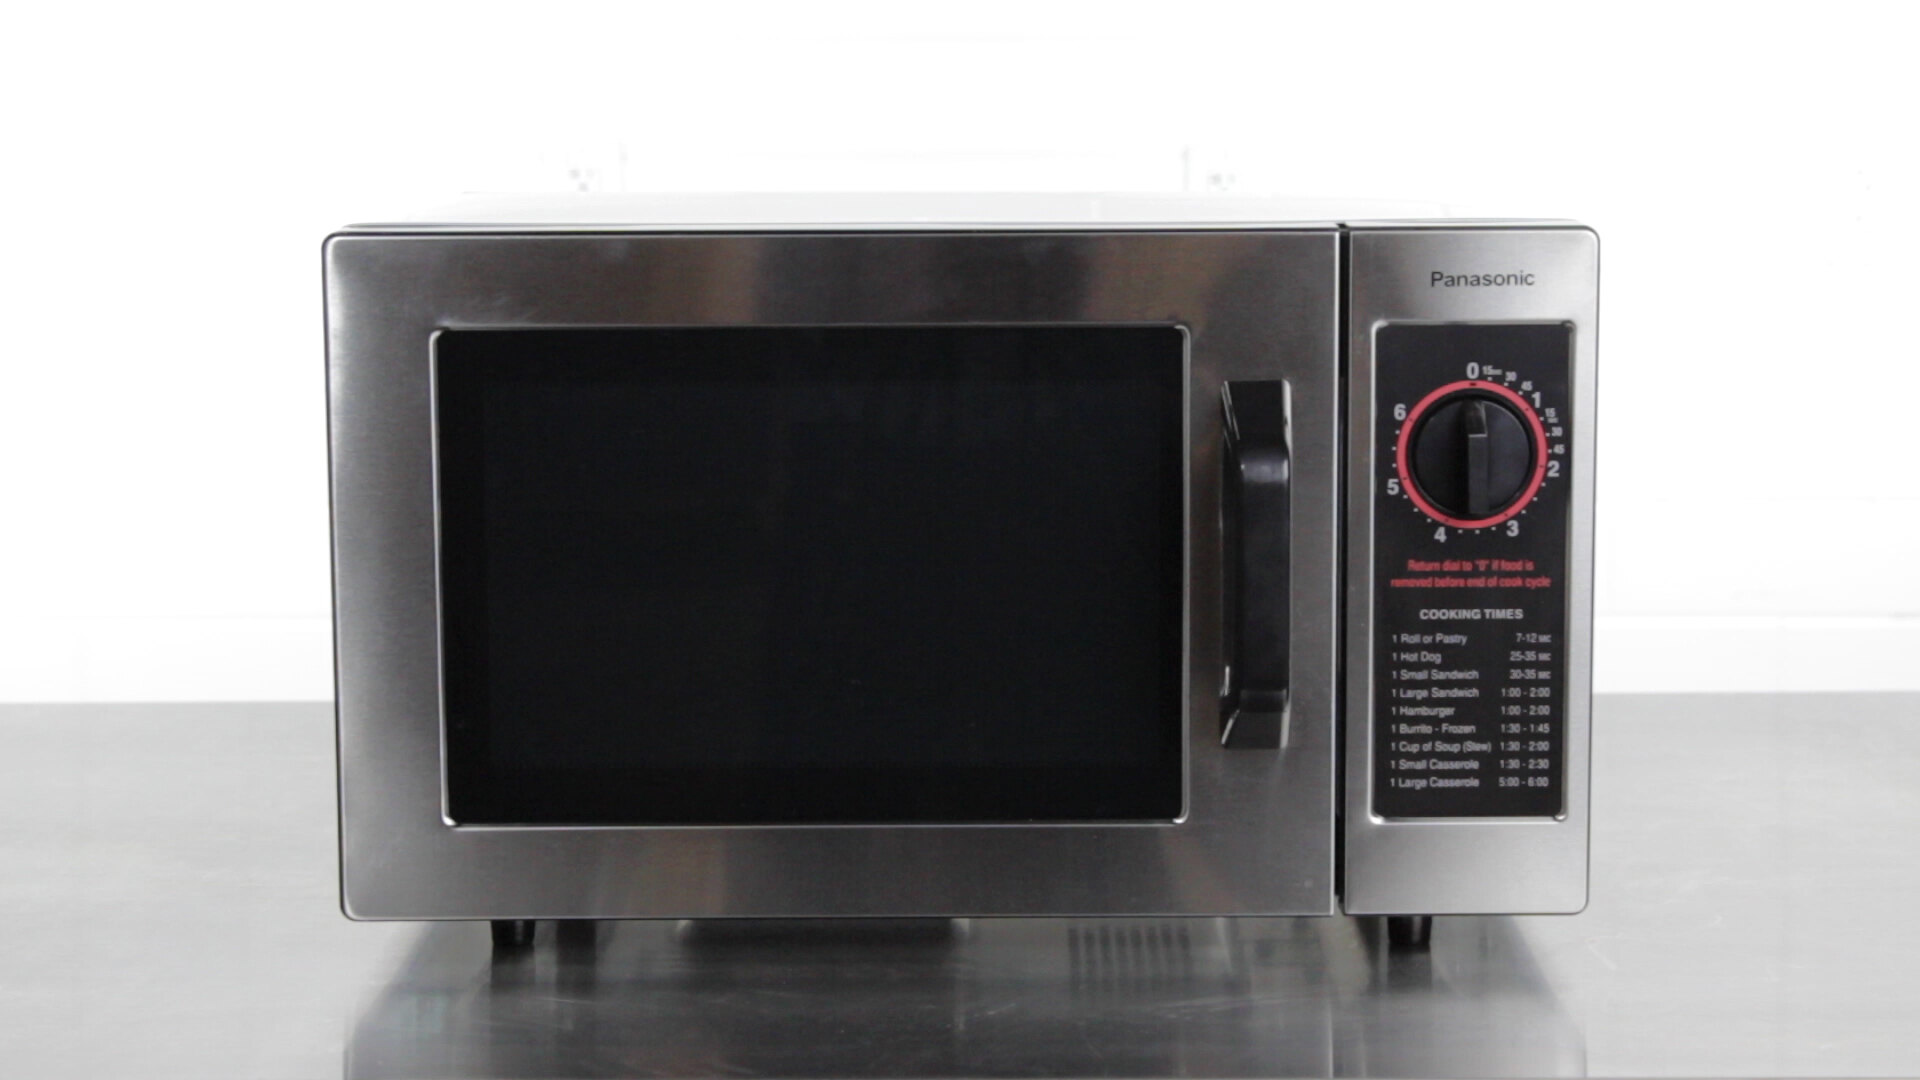 Solwave 1800W Stackable Commercial Microwave with Large 1.2 cu. ft.  Interior and Push Button Controls - 208/240V